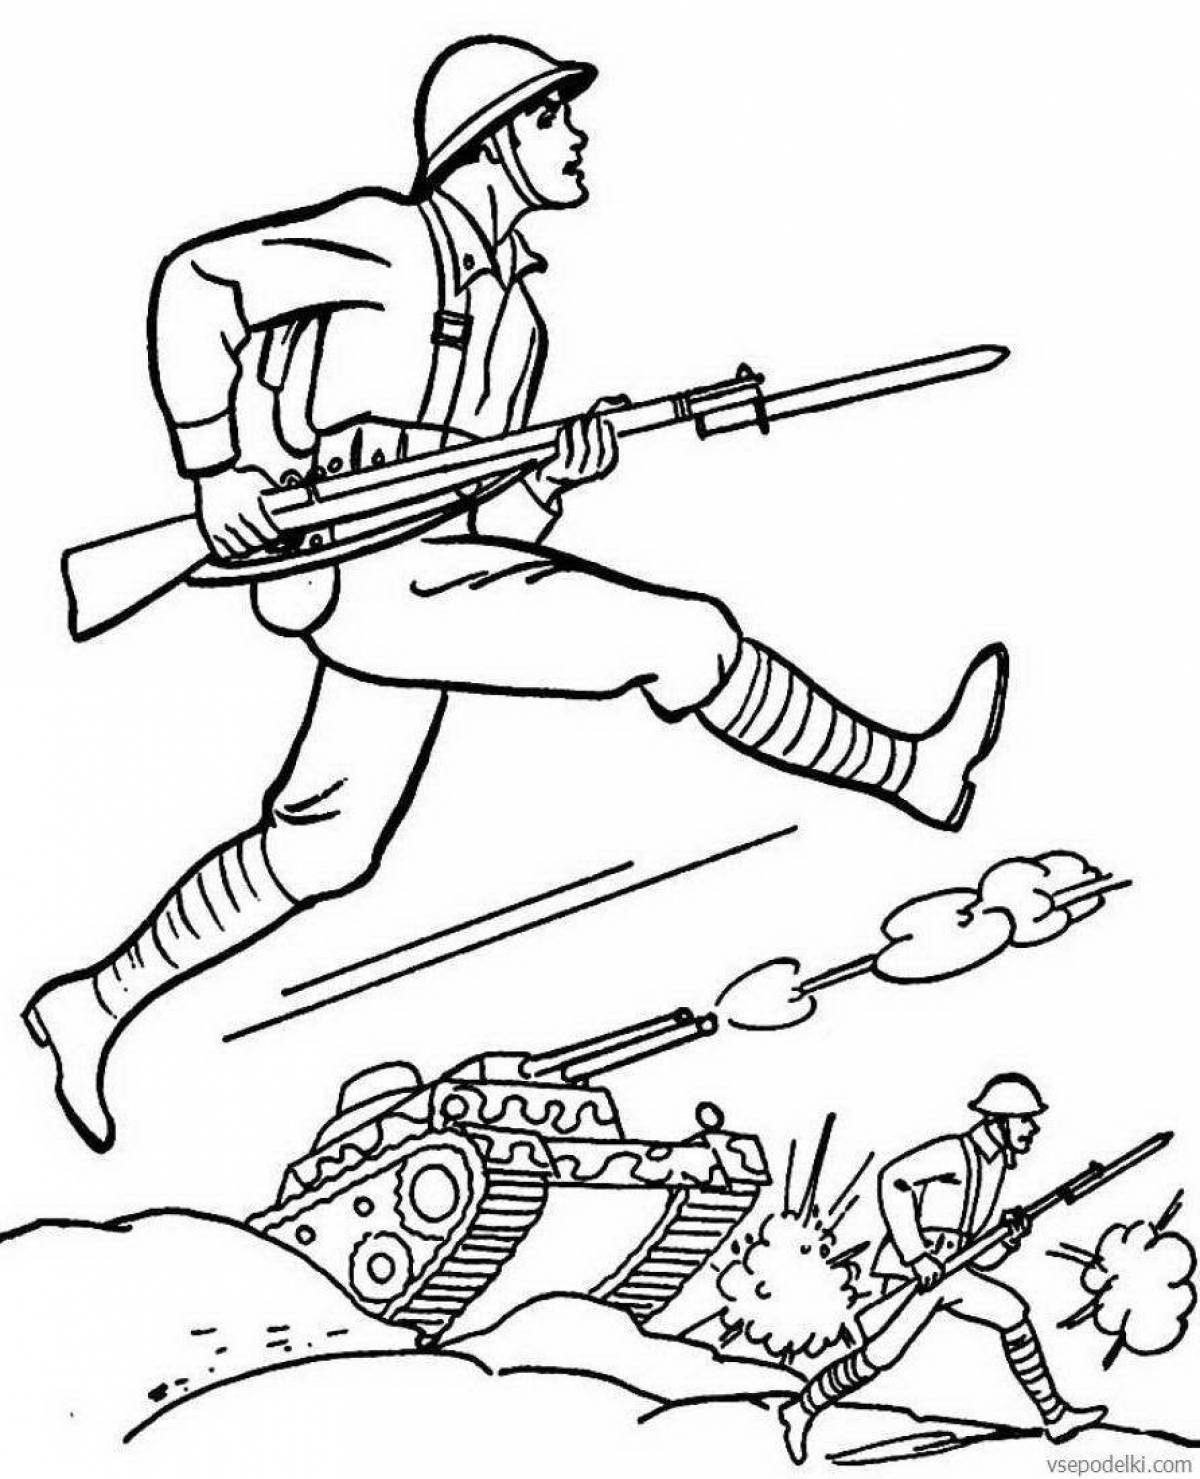 Adorable toy soldiers coloring pages for kids